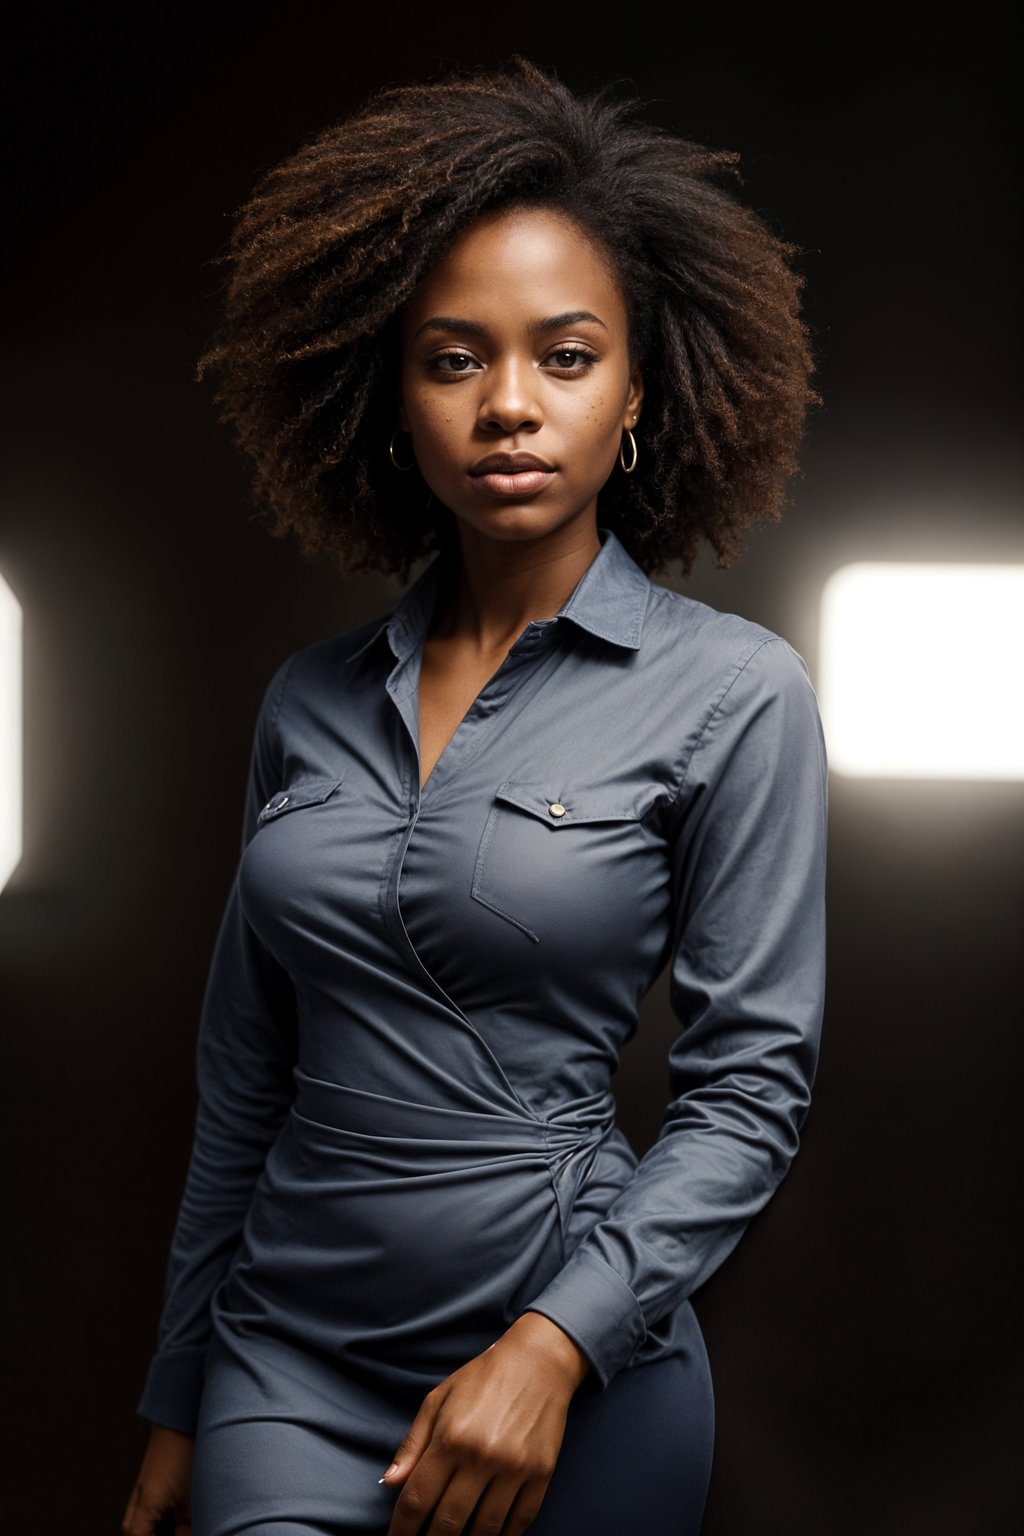 woman showcasing a modern slim-fit charcoal with a light blue dress shirt and a contrasting pocket square